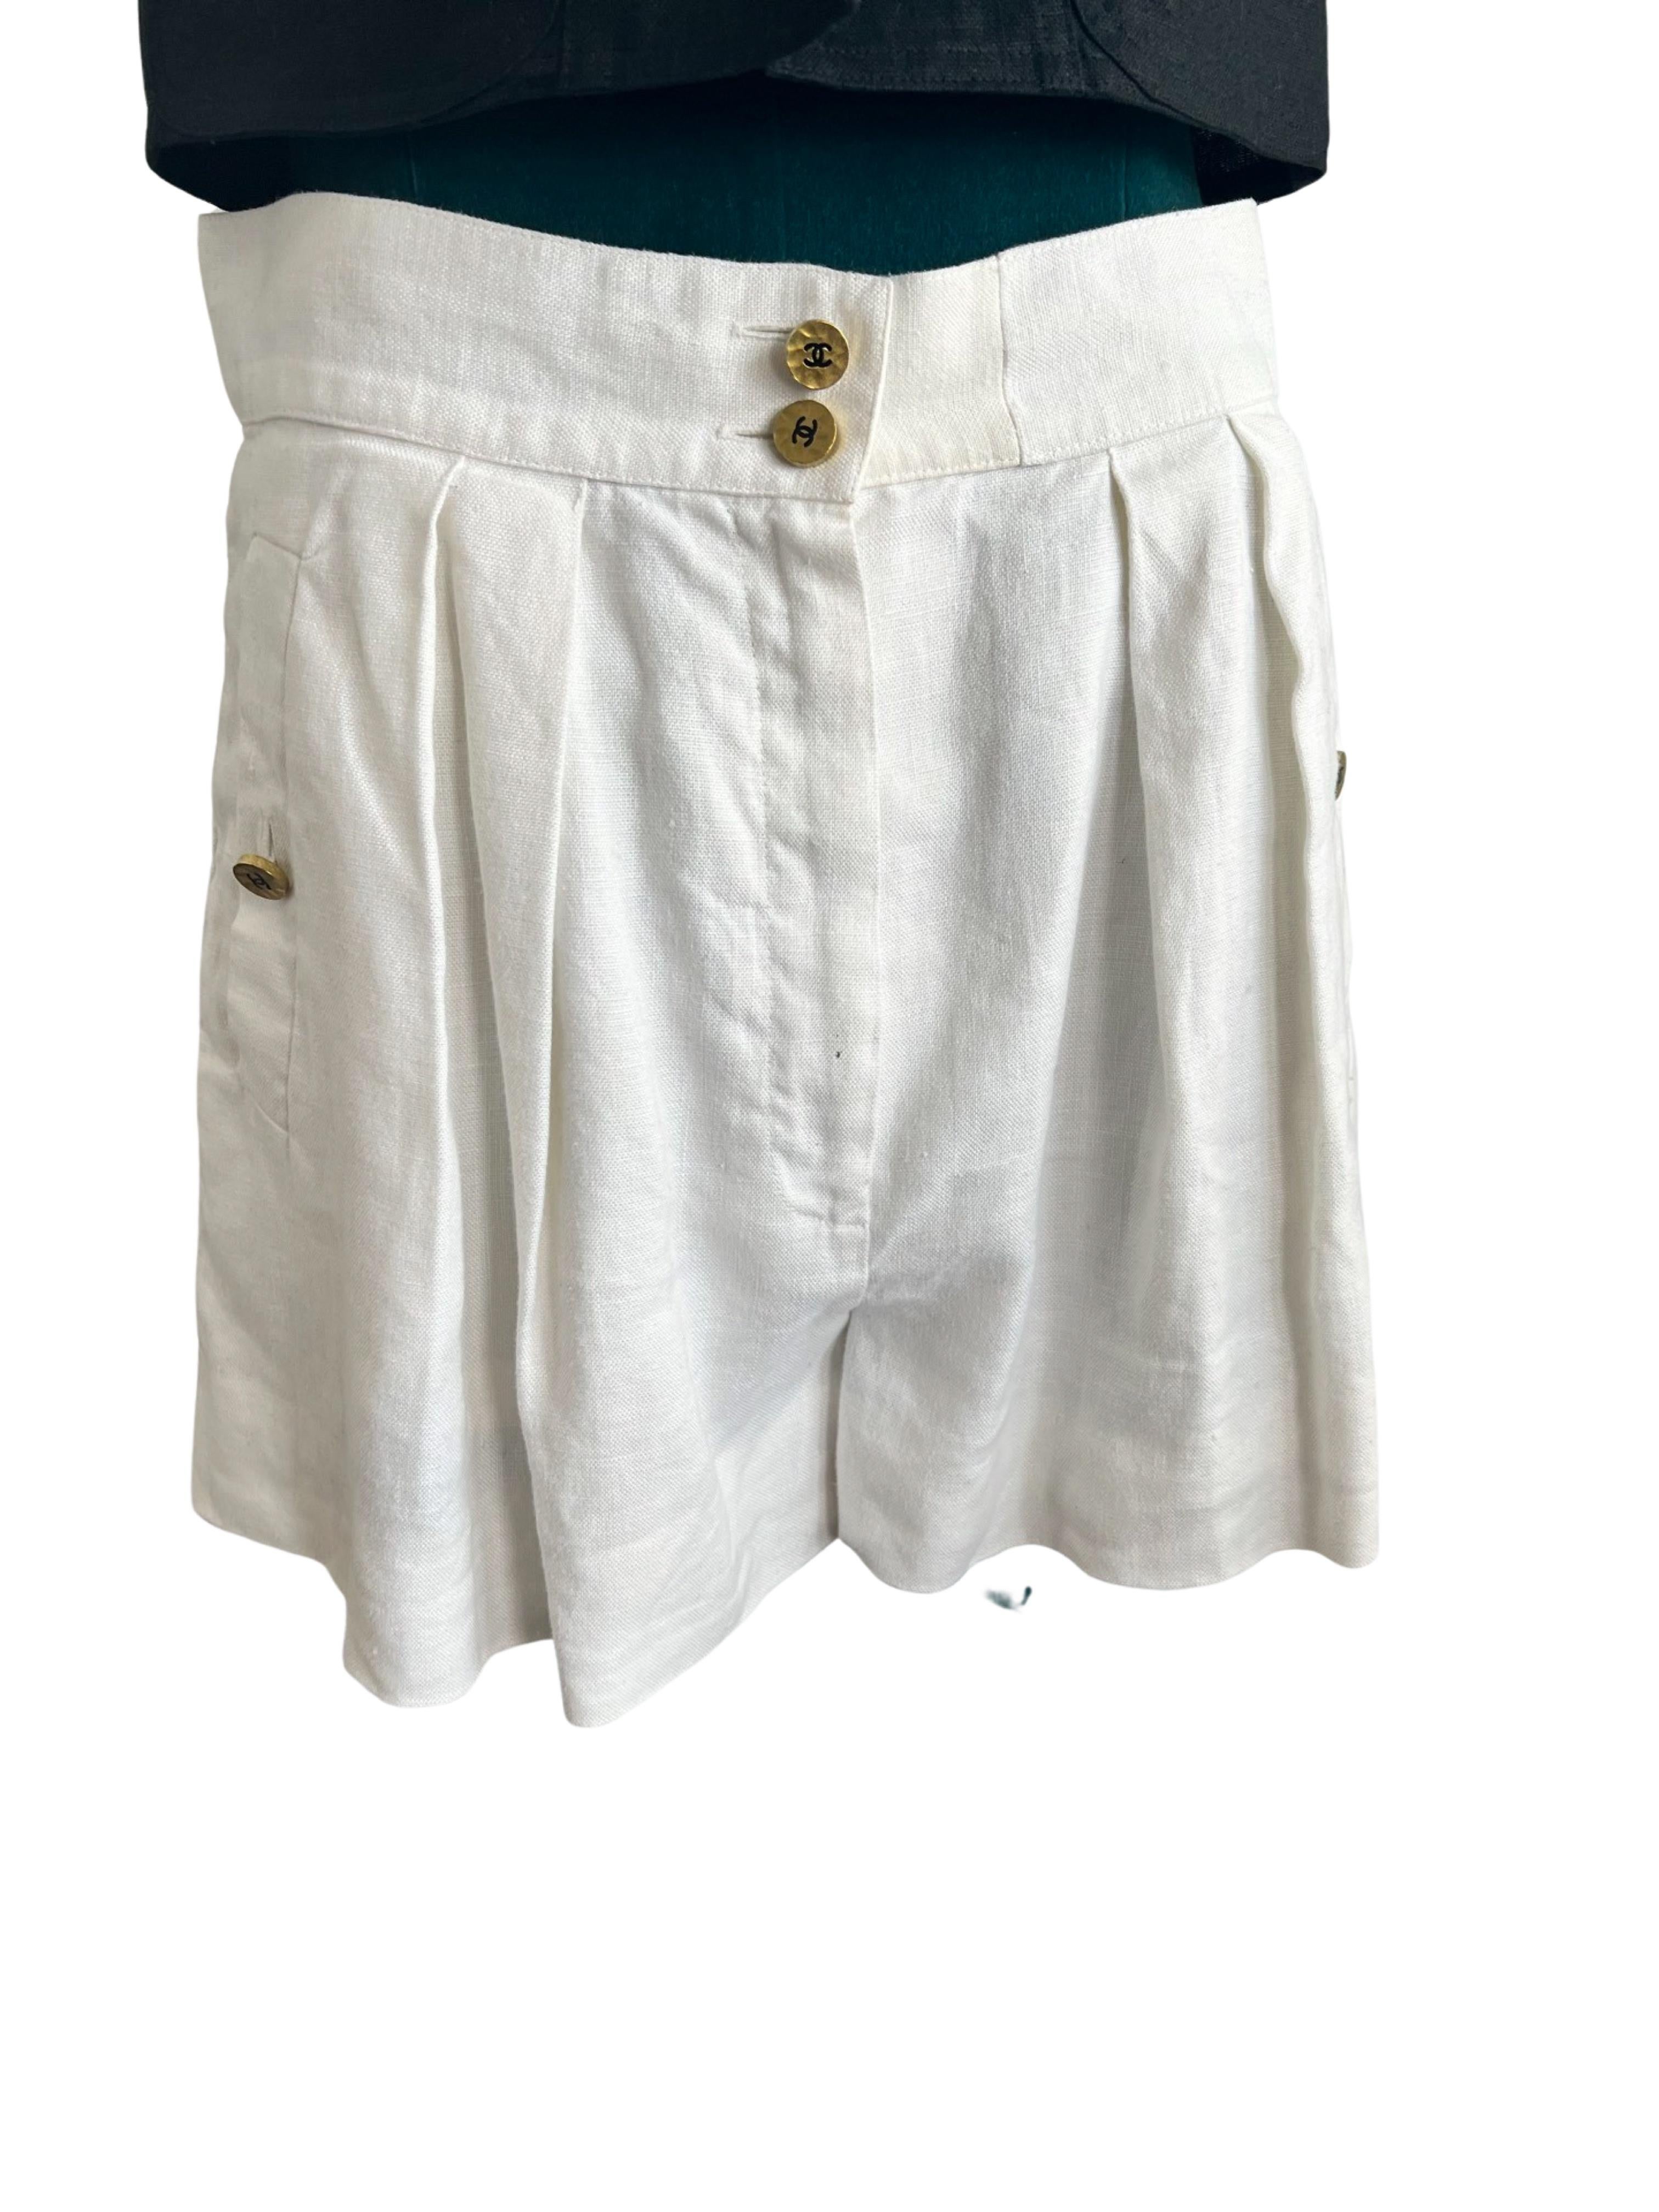 Step into the nostalgia of the 90s with these chic Chanel white line shorts. Exuding the classic Chanel aesthetic, these shorts combine comfort, style, and luxury. Here are the key features of this iconic piece:

Design:
These shorts feature a clean